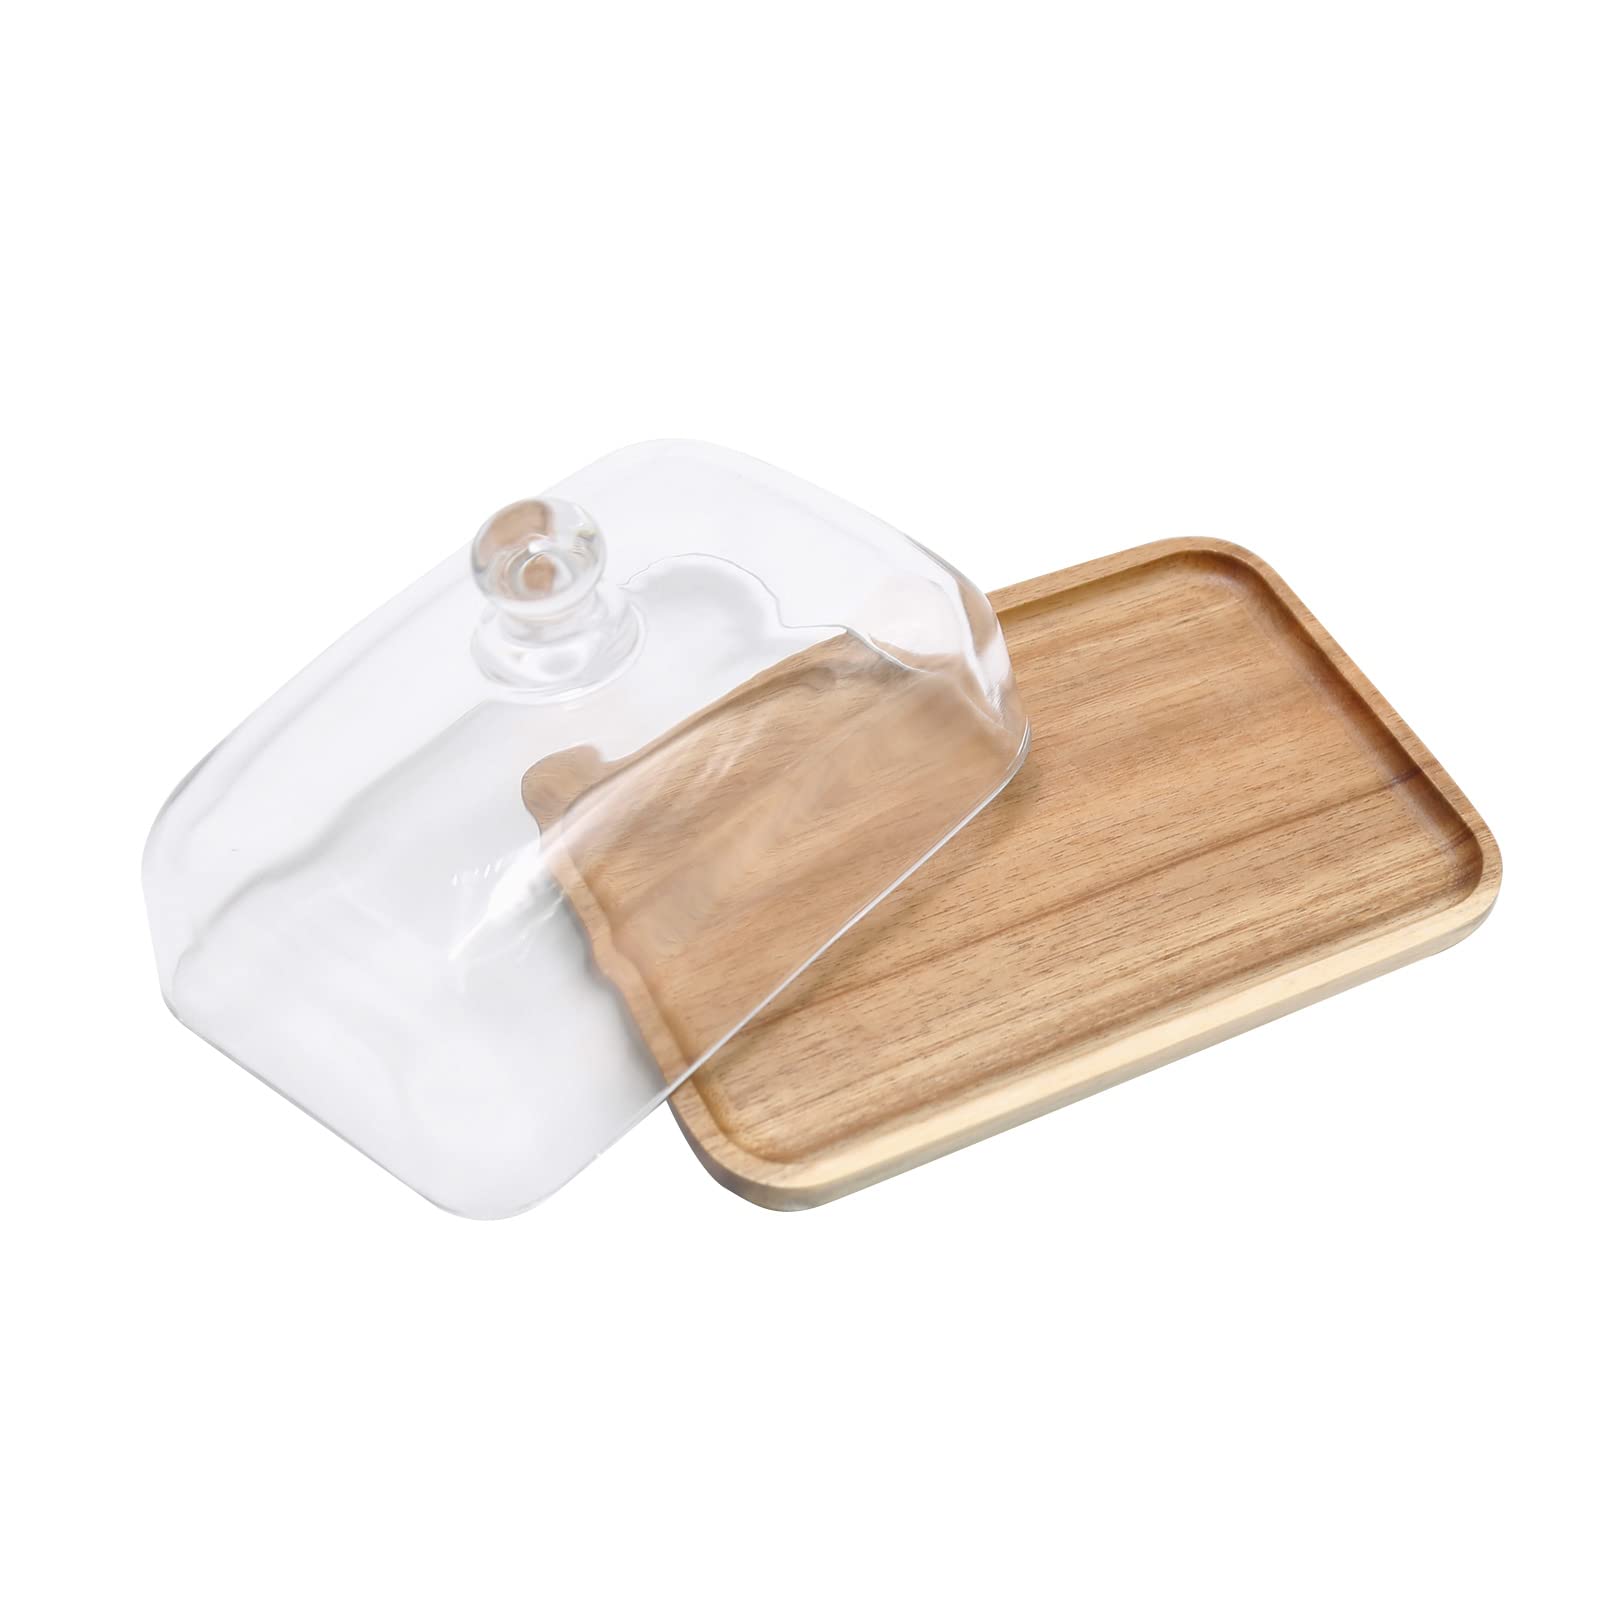 EATAKWARD Acacia Wood Butter Dish with Clear Glass Cover Lid, 7'' x 4.7'' x 4'' Wood Butter Tray for Dinner Plate Dessert Cake Refrigerator& Counter for Butter, Block of Cream Cheese& Serving Dish